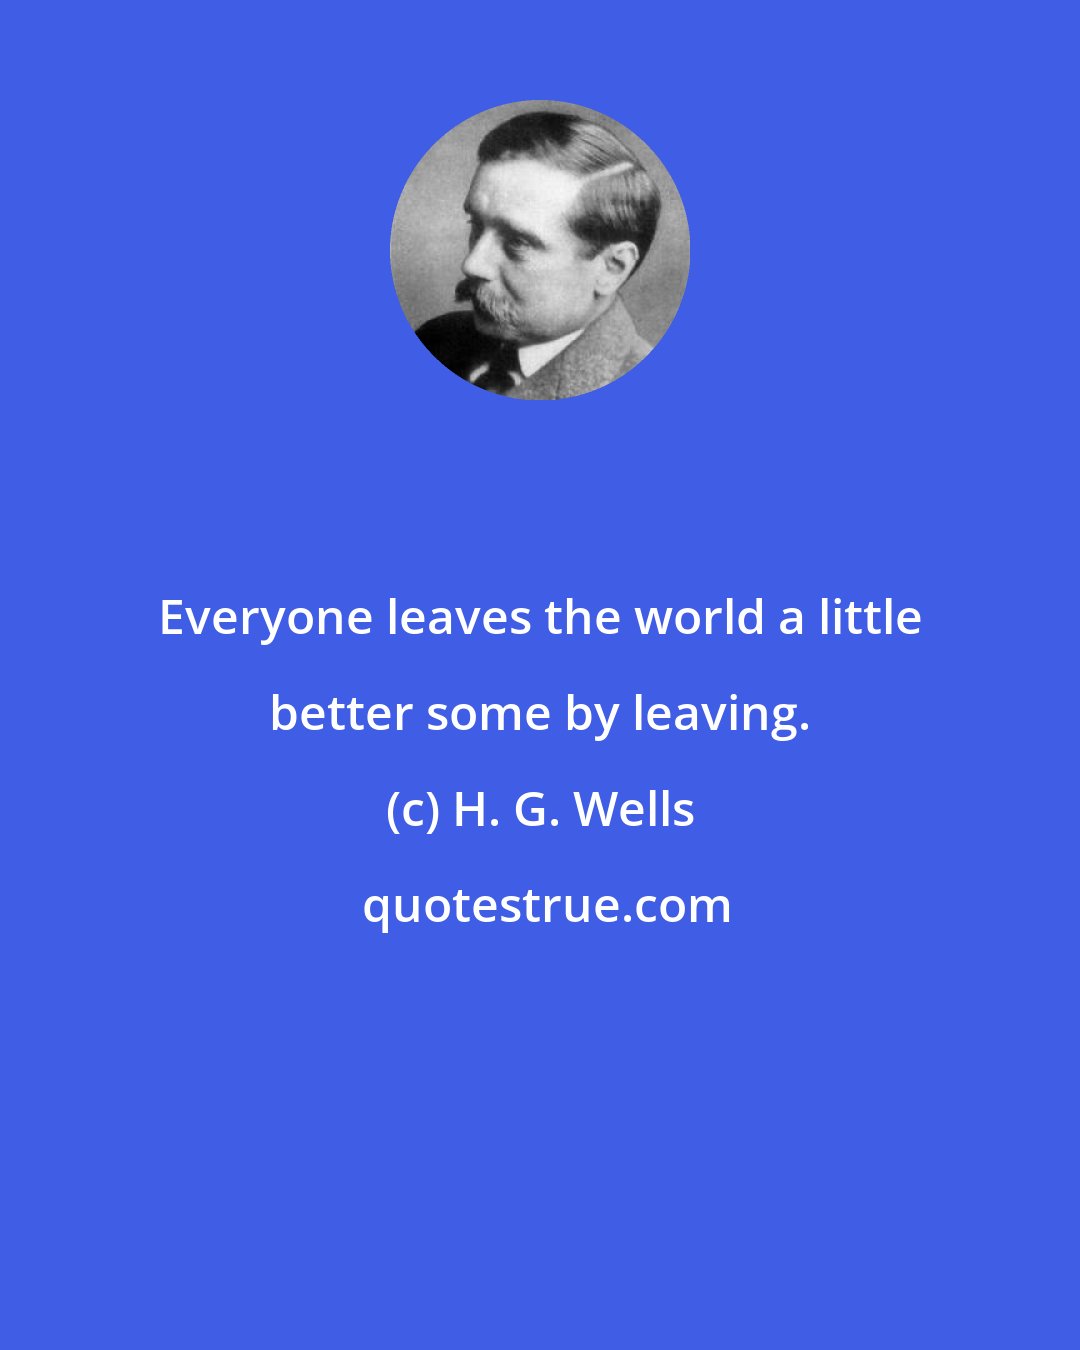 H. G. Wells: Everyone leaves the world a little better some by leaving.